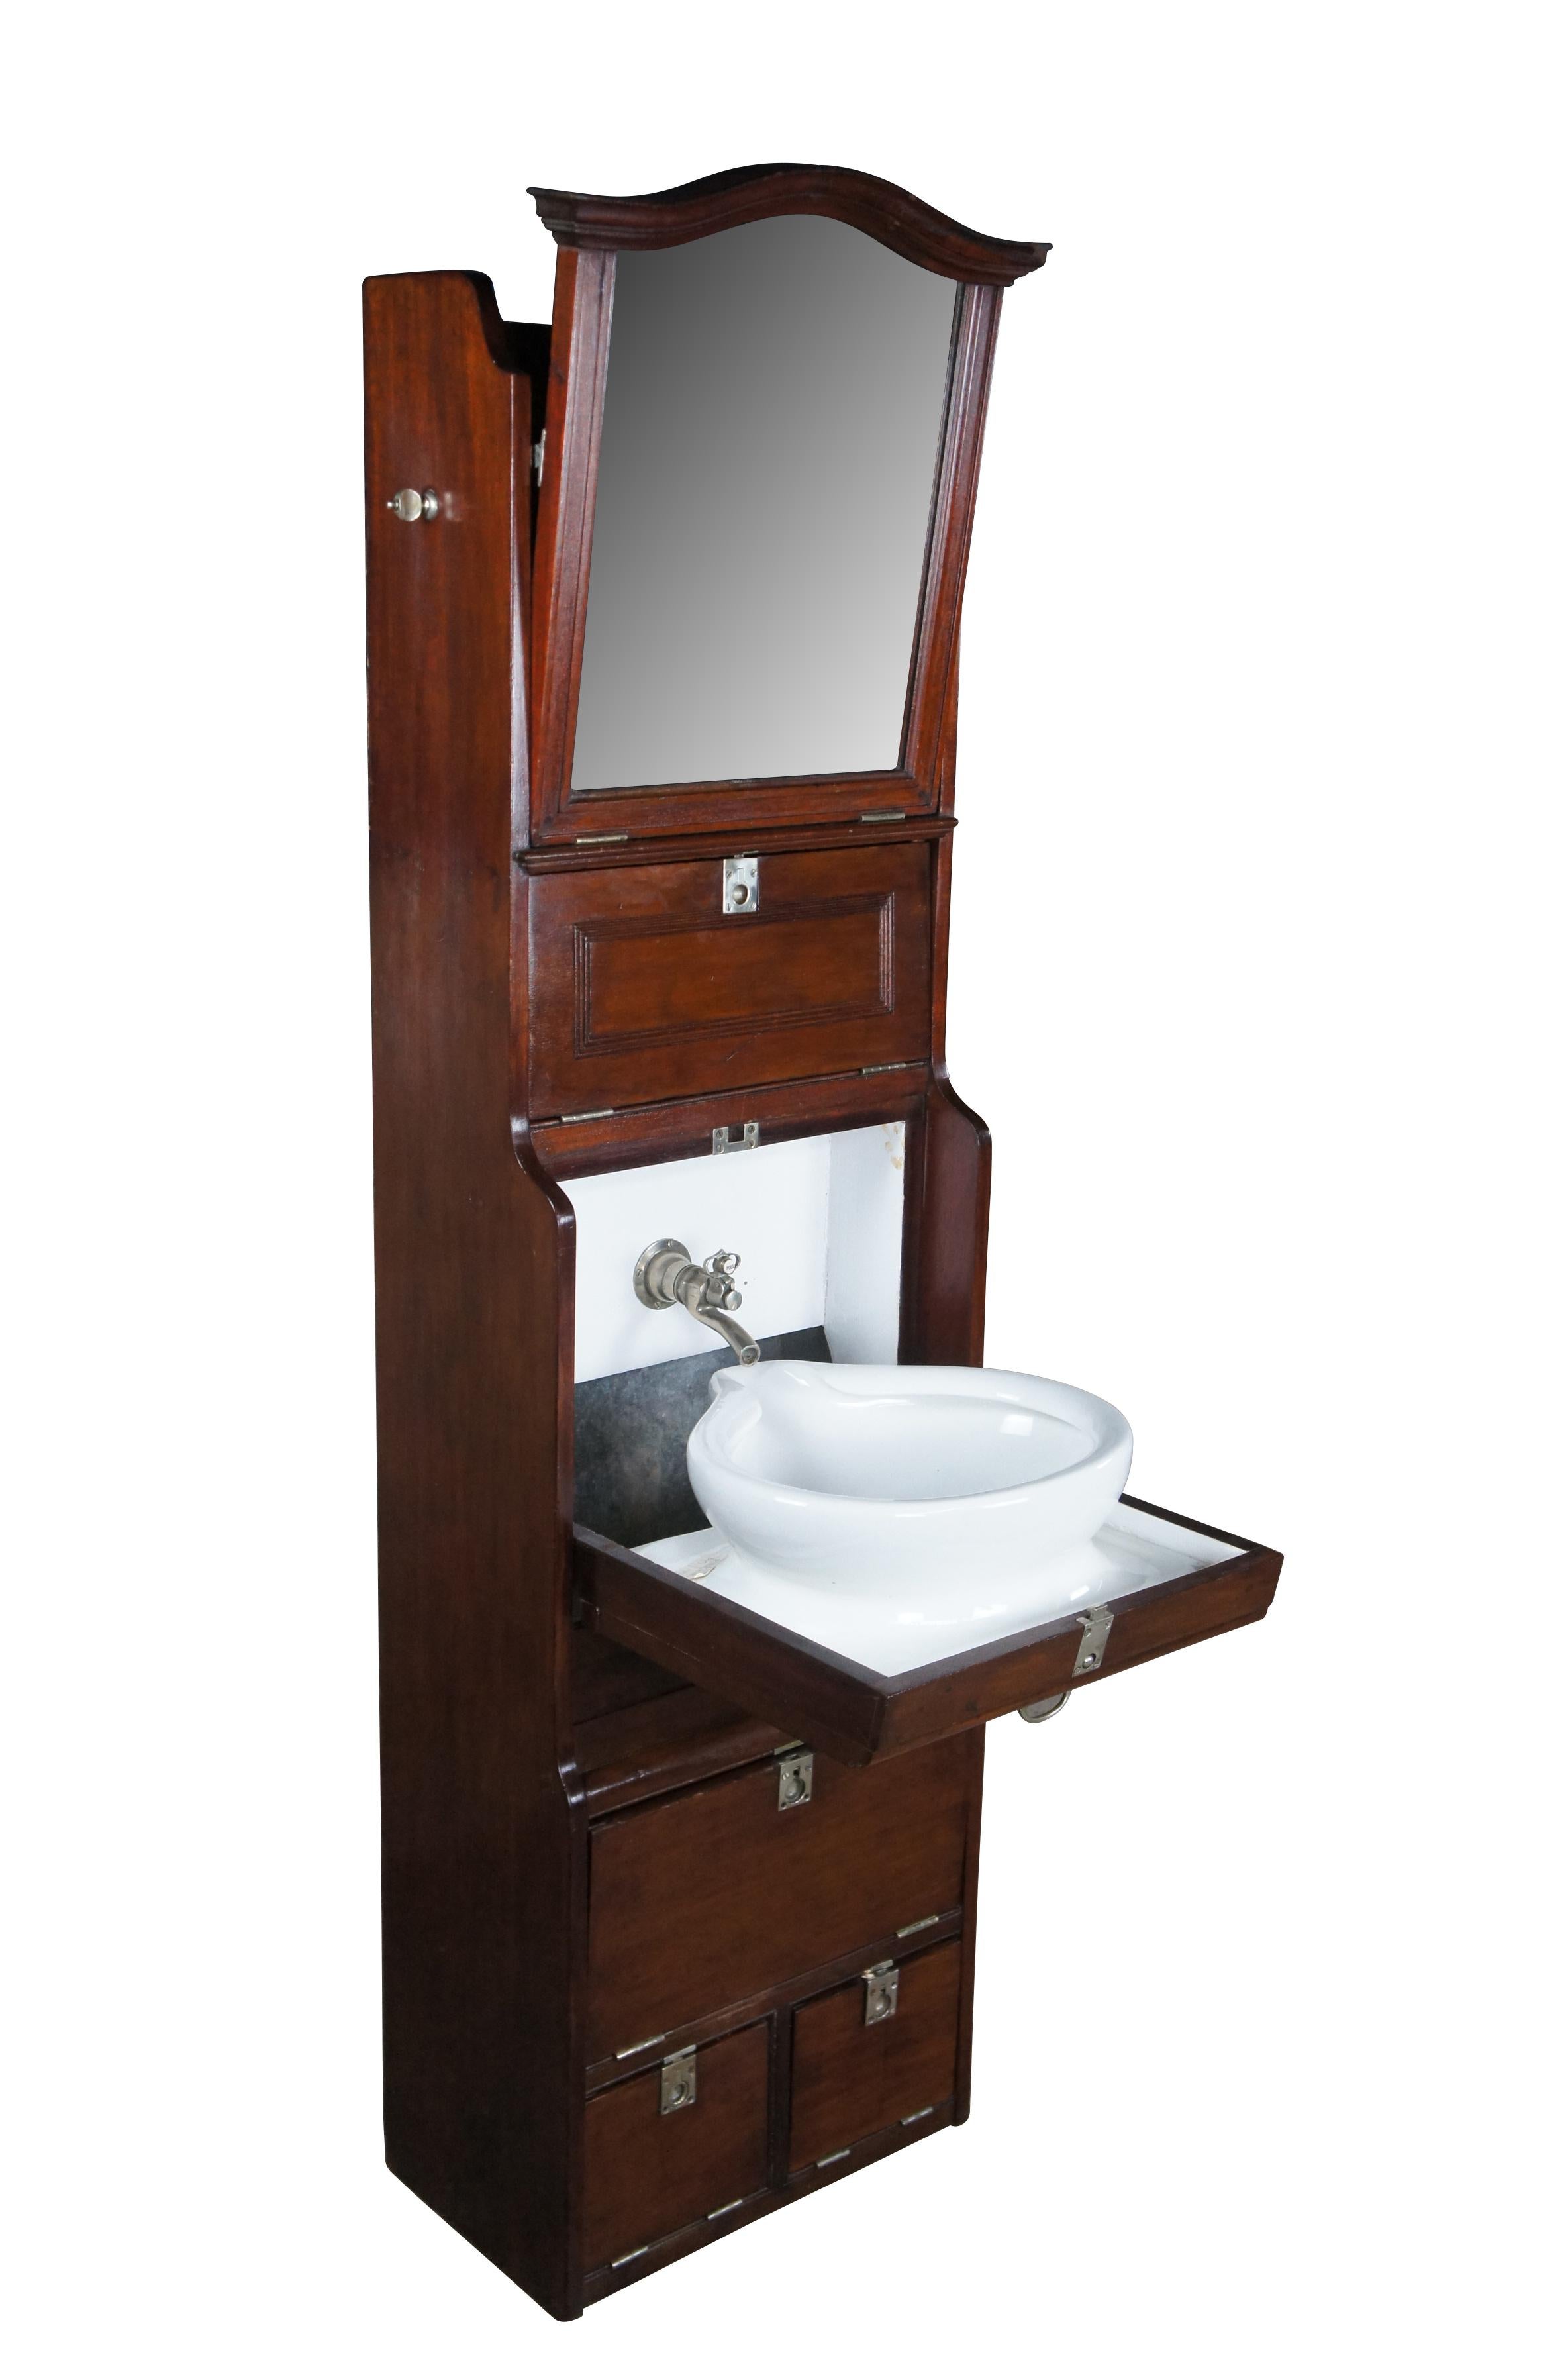 Antique Mahogany Porcelain Nautical Maritime Boat Cabin Sink Wash Basin Cabinet In Fair Condition For Sale In Dayton, OH